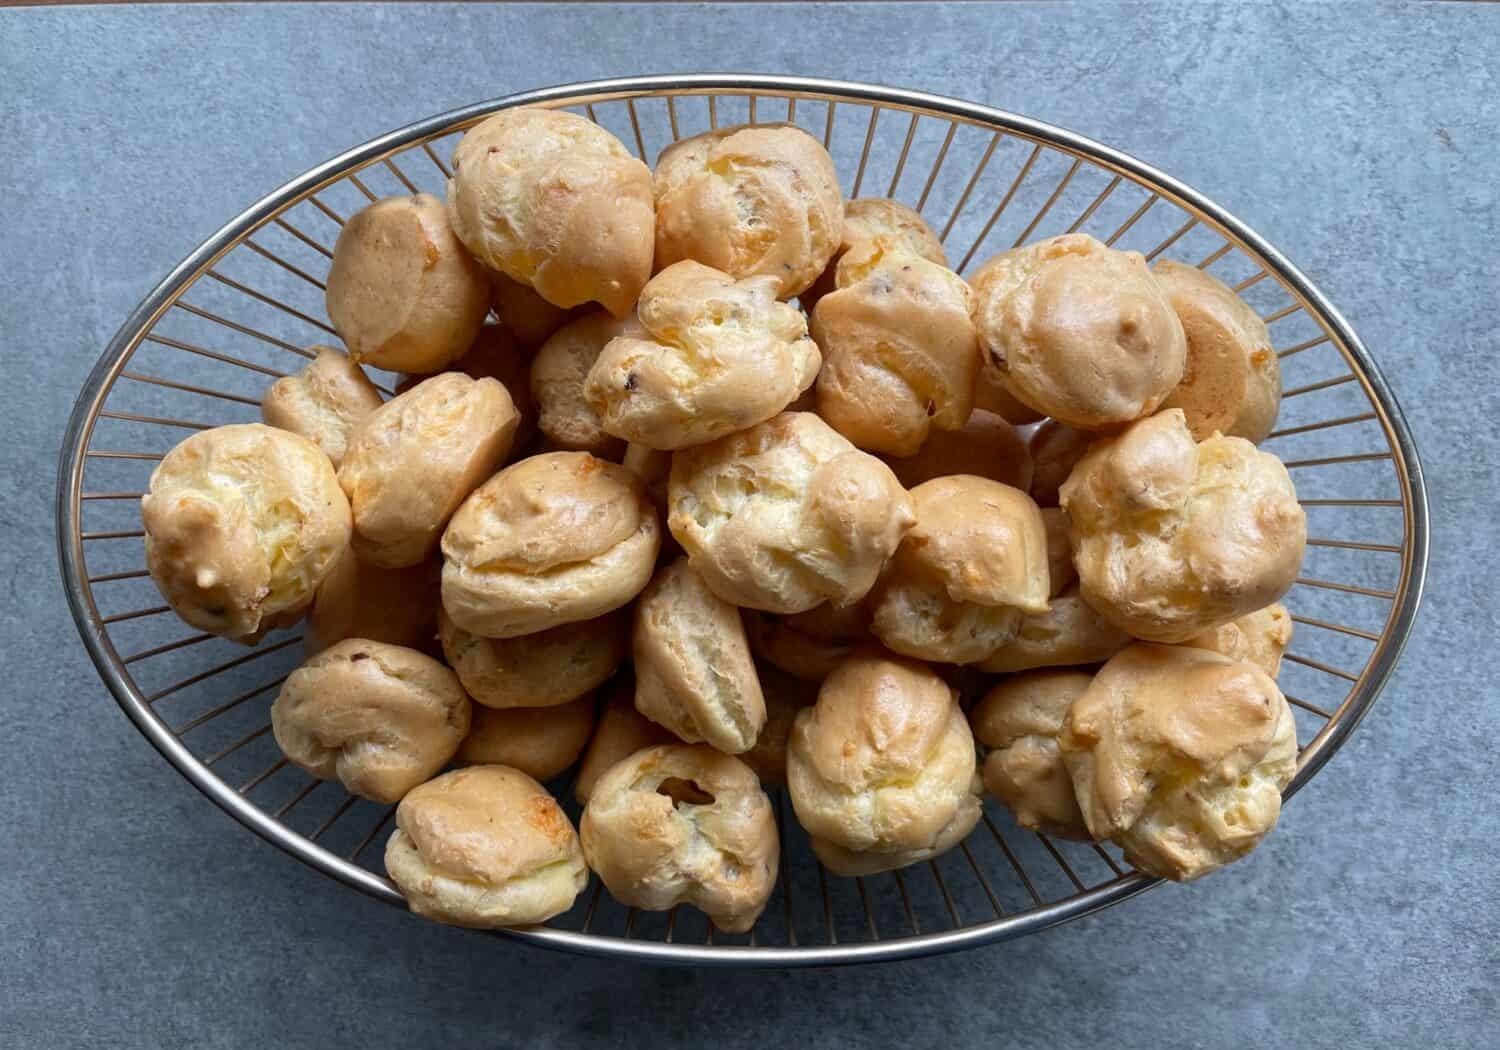 Bacon and Cheese Puffs (Gougères)